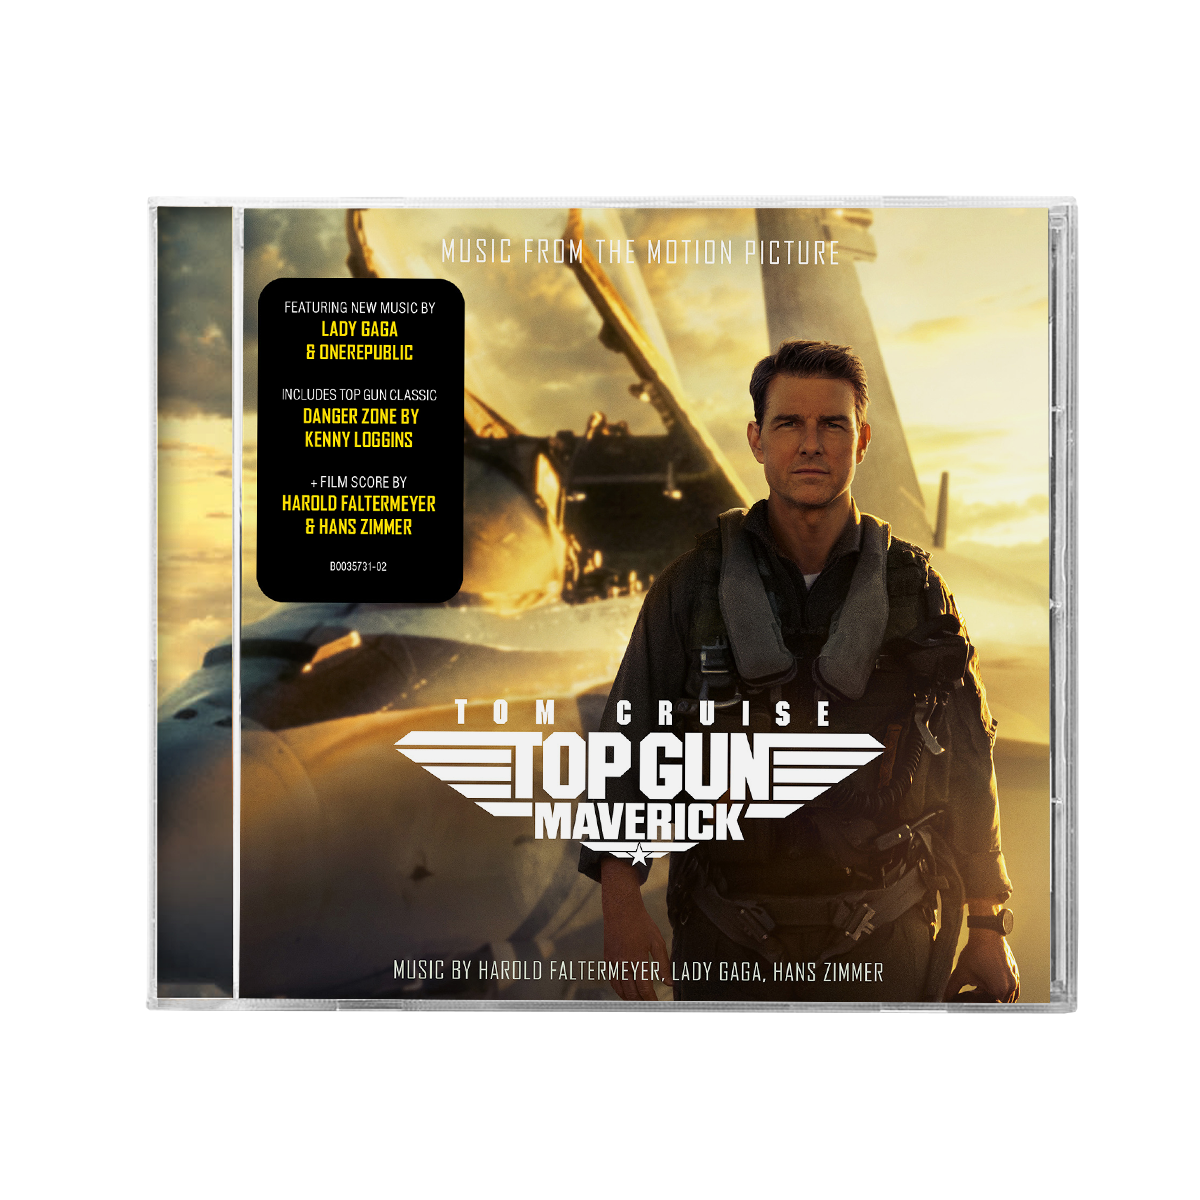 Lady Gaga - Top Gun: Maverick (Music From The Motion Picture) CD